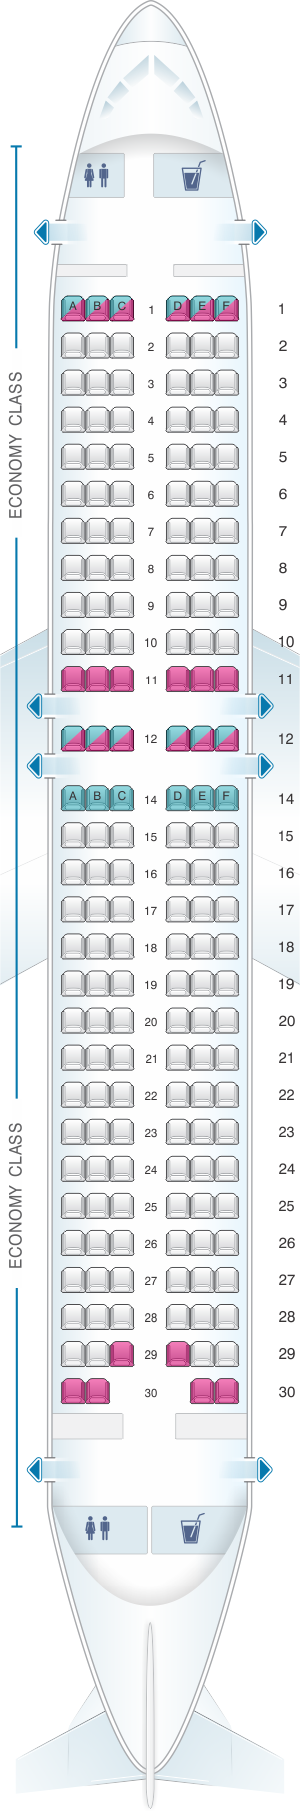 Seat map for ANA - All Nippon Airways Airbus A320 domestic